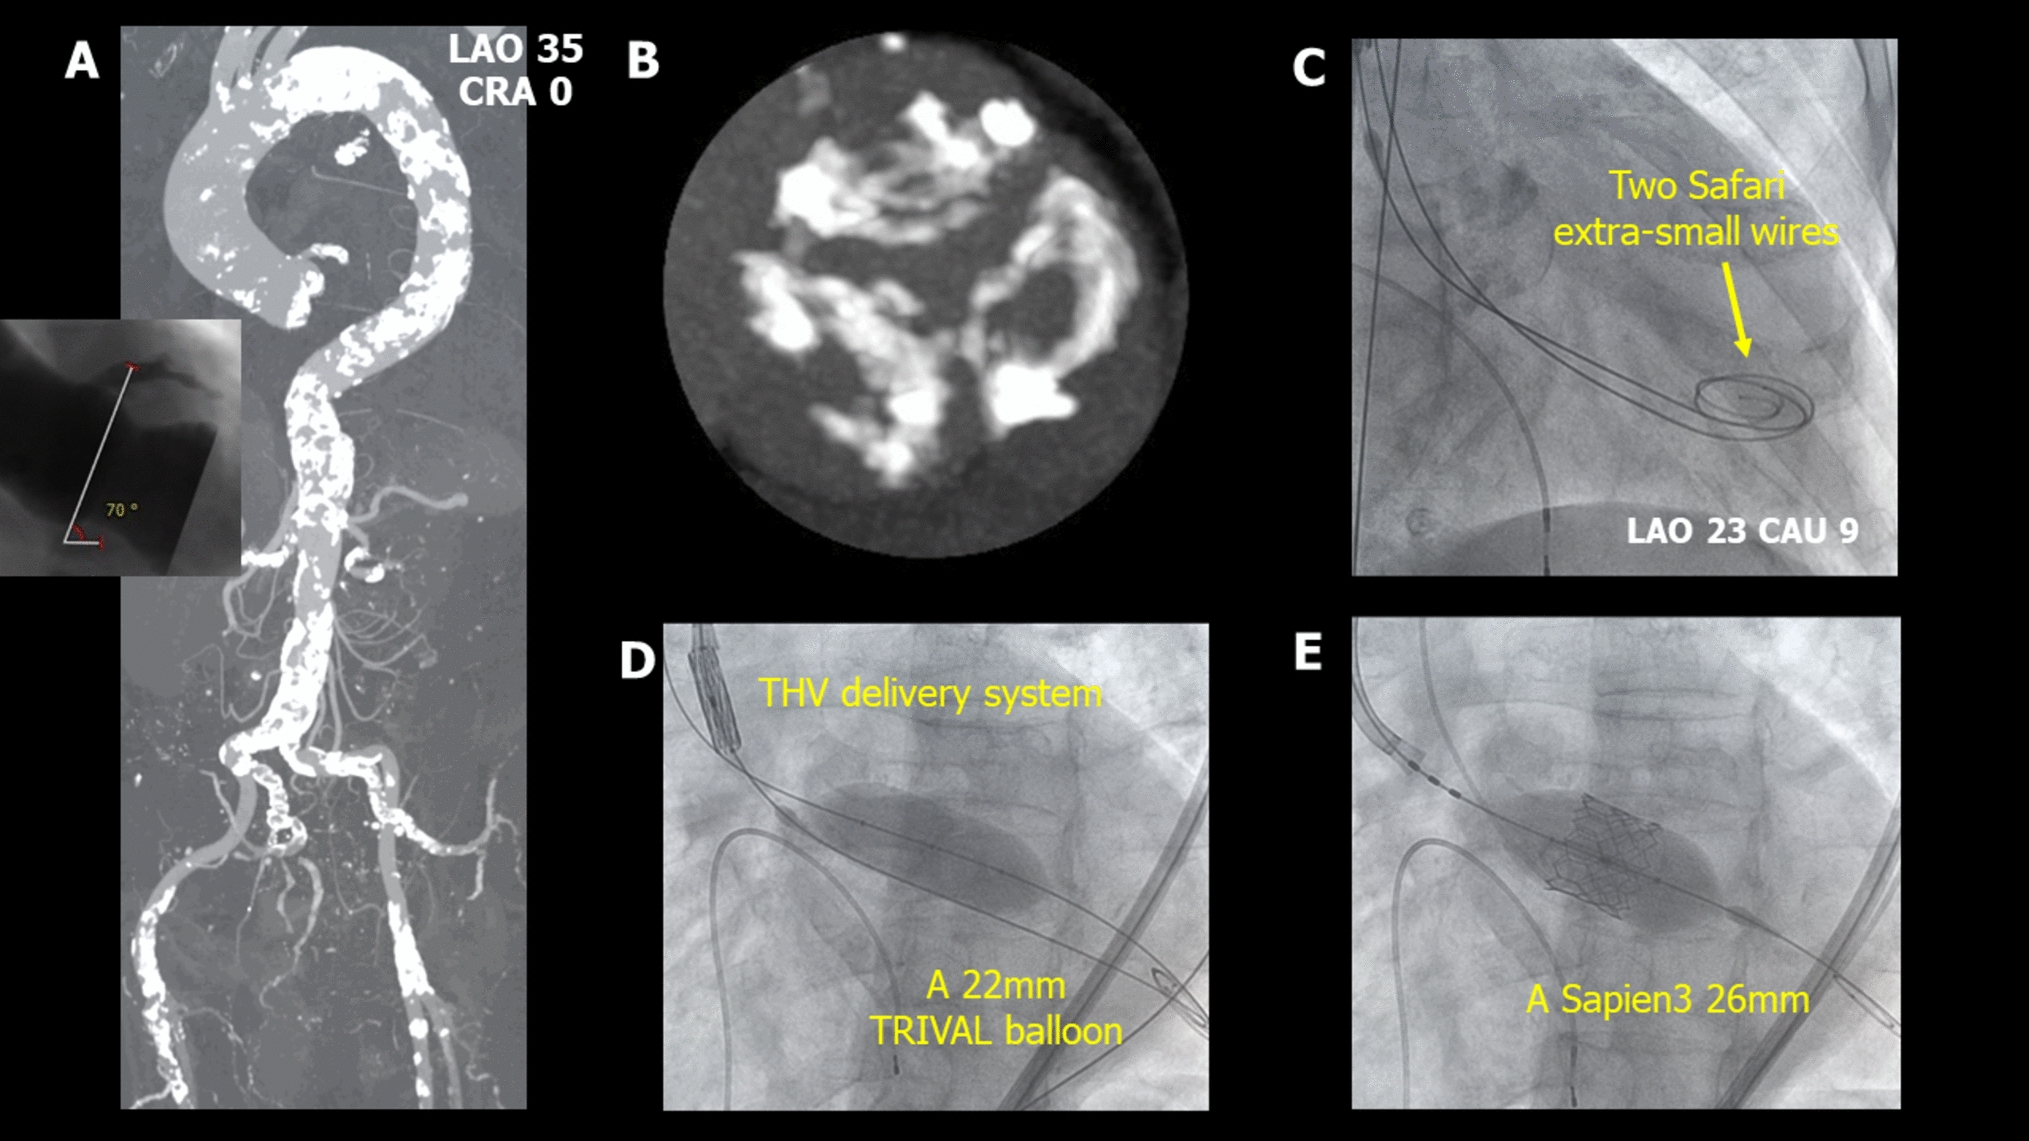 How to evacuate when Sapien3 transcatheter heart valve cannot pass through a severely calcified aortic valve